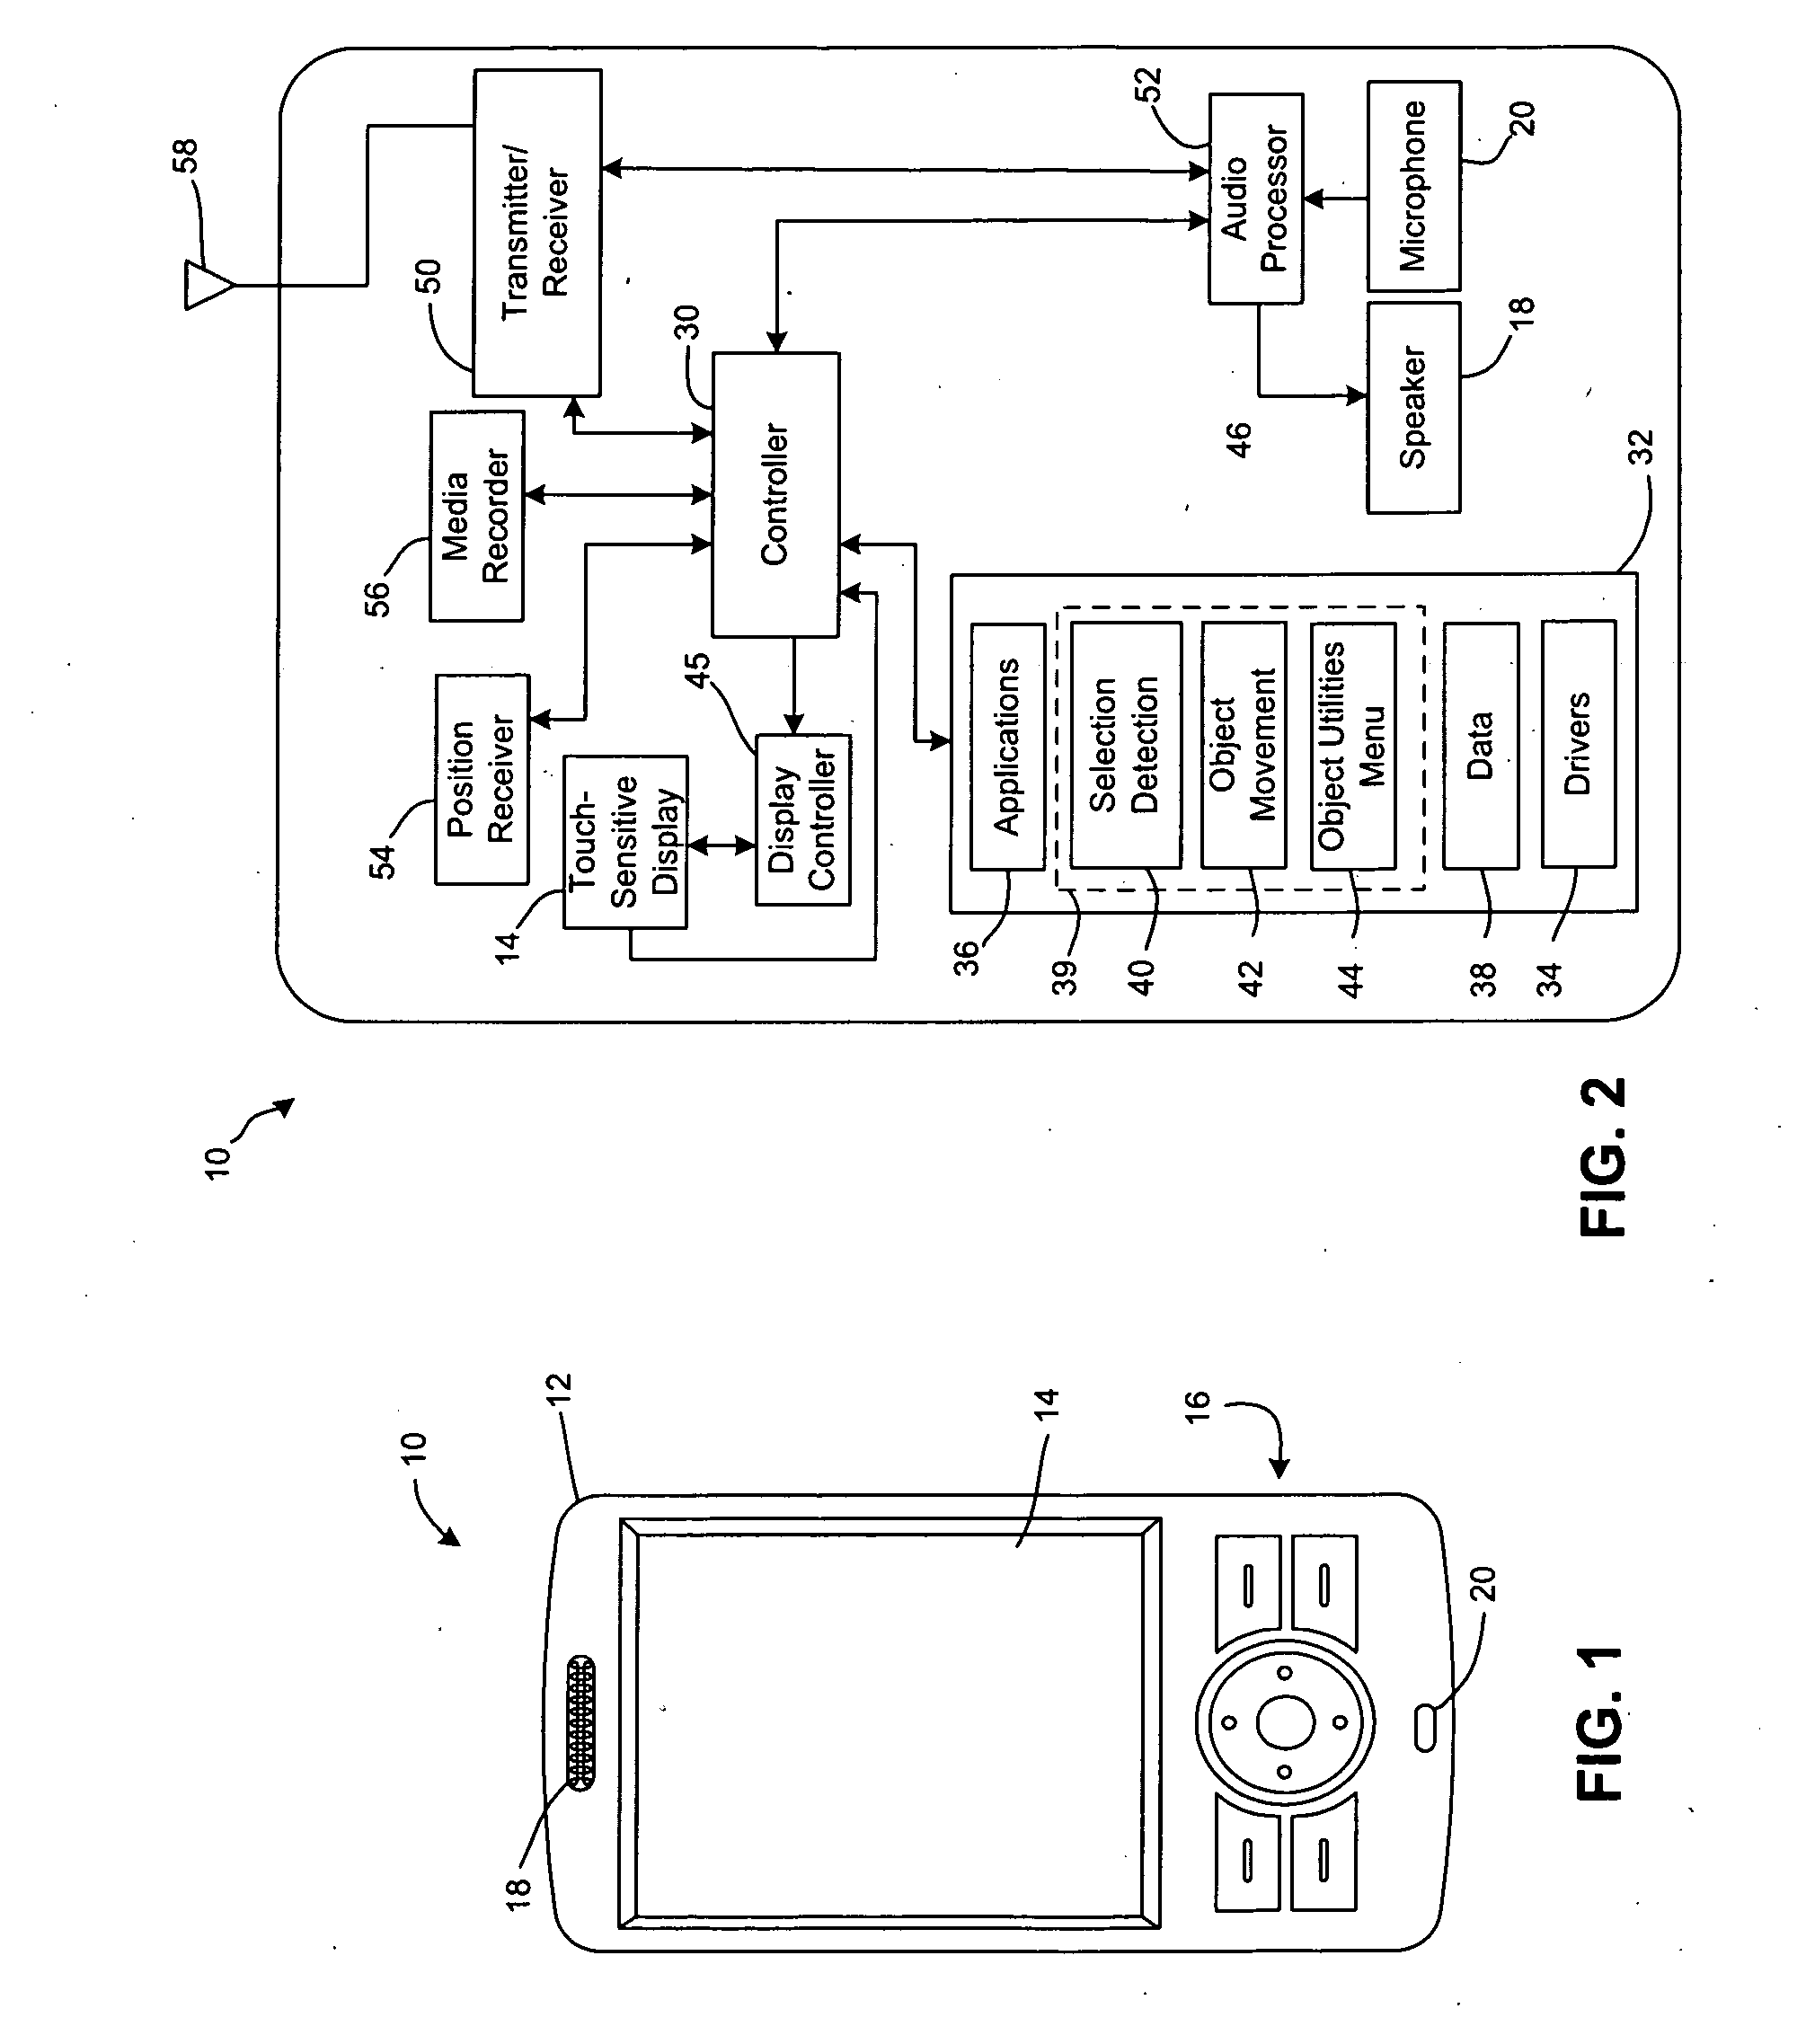 Method and apparatus for selecting an object